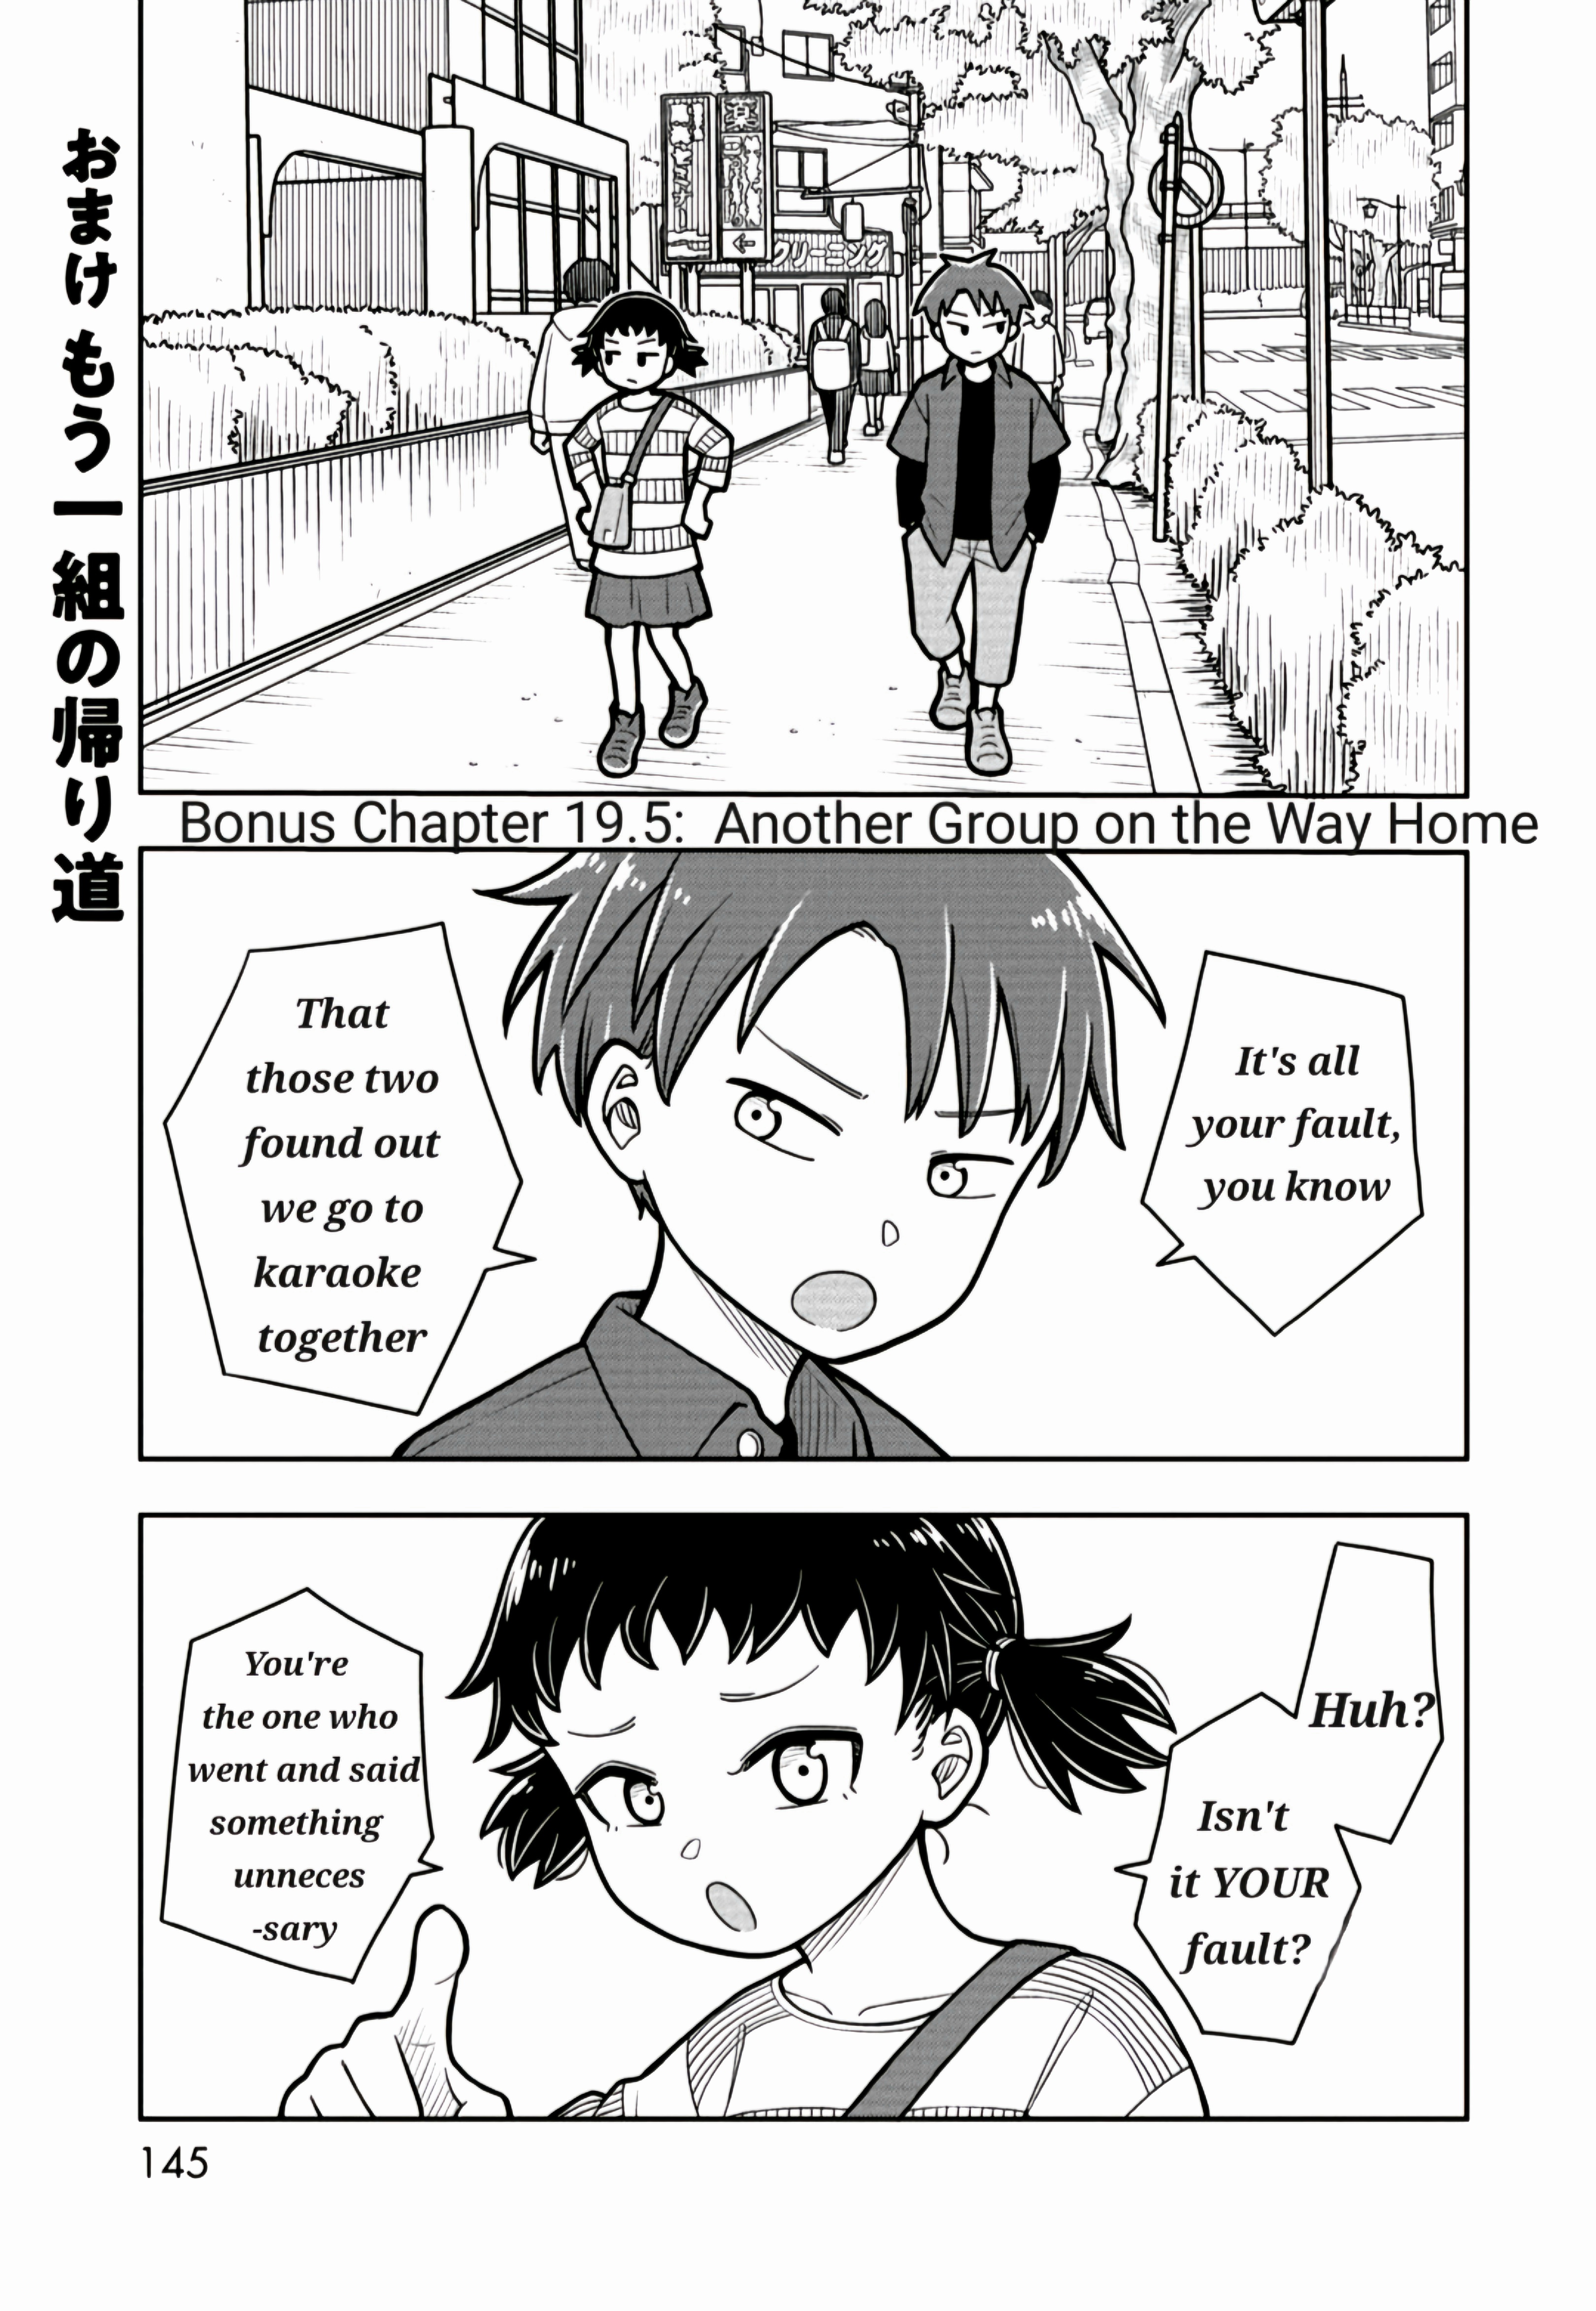 Starting Today She's My Childhood Friend Vol.2 Chapter 19.5: Volume 2 Bonus Chapter 19.5:  Another Group On The Way Home (Takes Place After The Events Of Chapter 15) - Picture 1